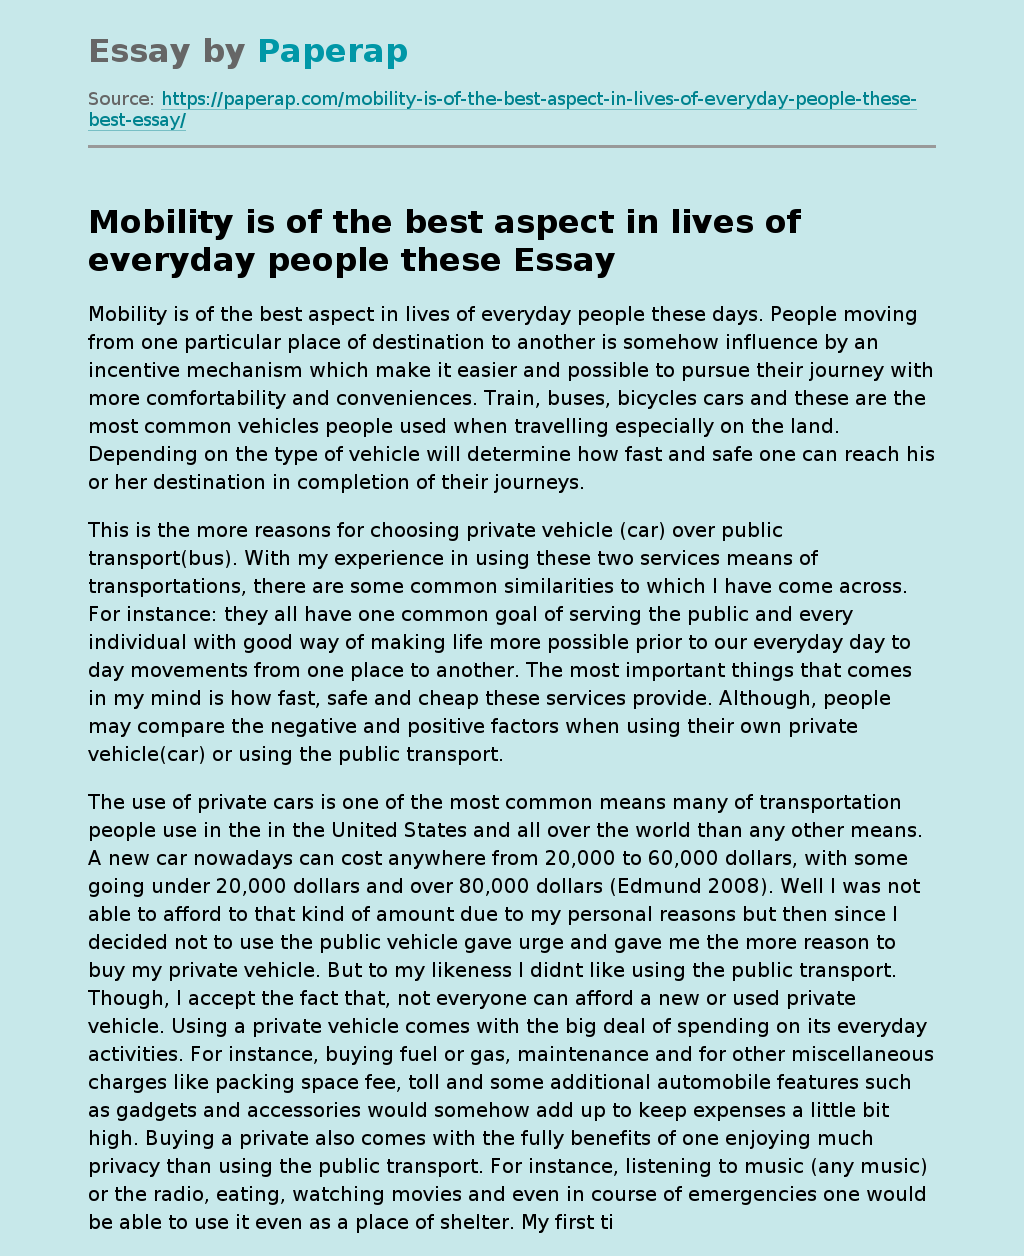 Mobility as the Best Aspect These Days